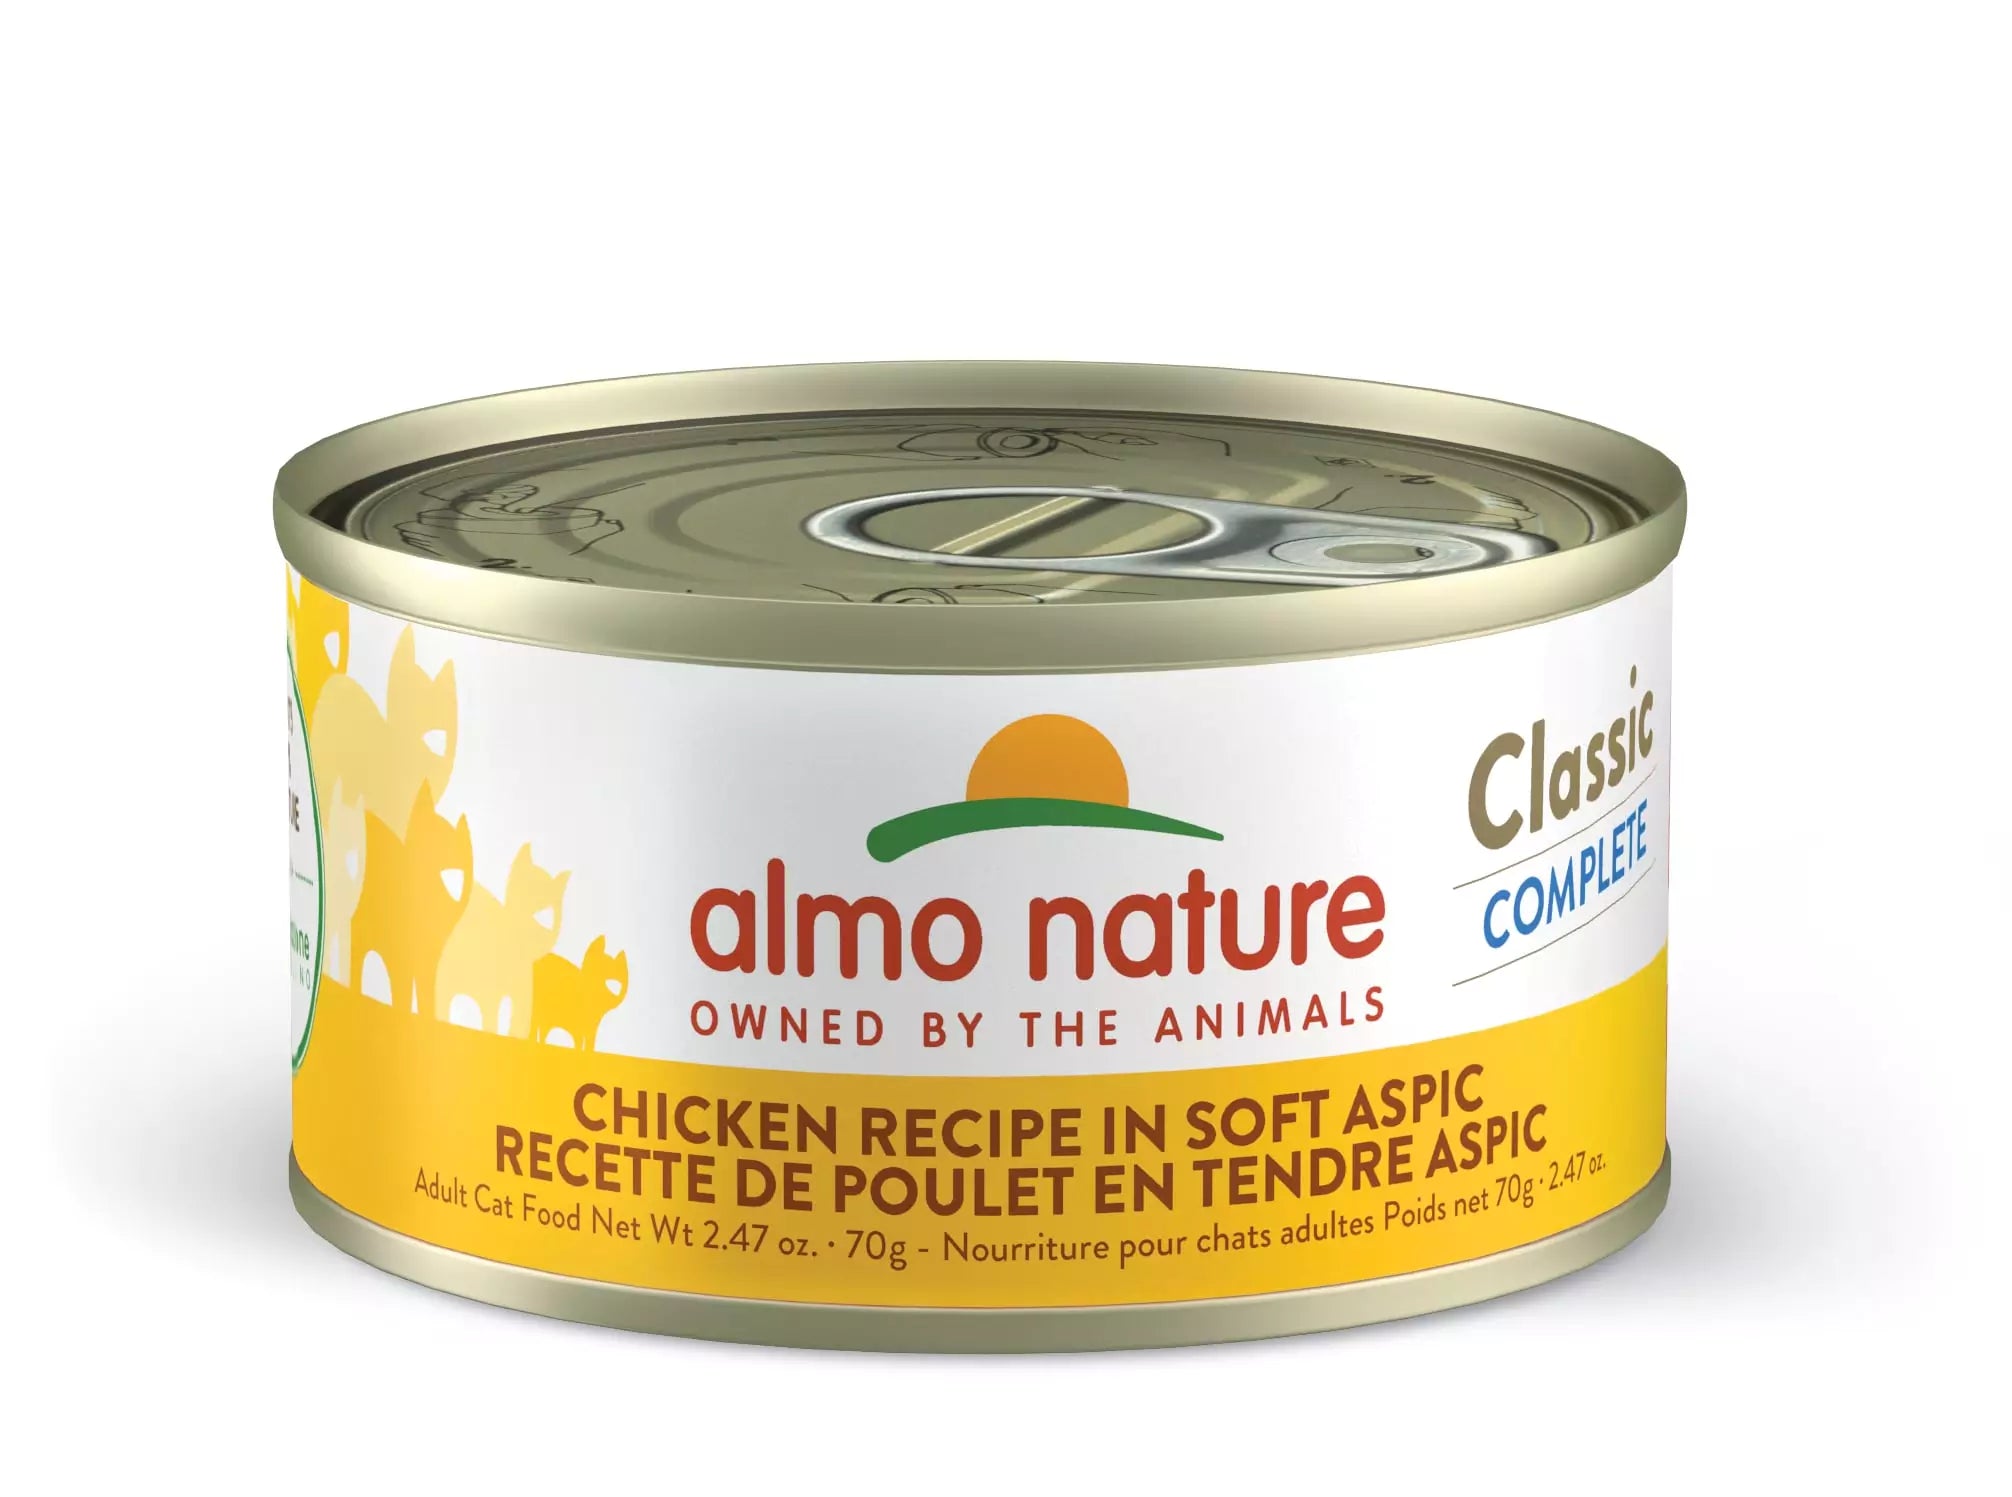 Almo Nature -Classic Complete Chicken in Soft Aspic (Wet Cat Food)